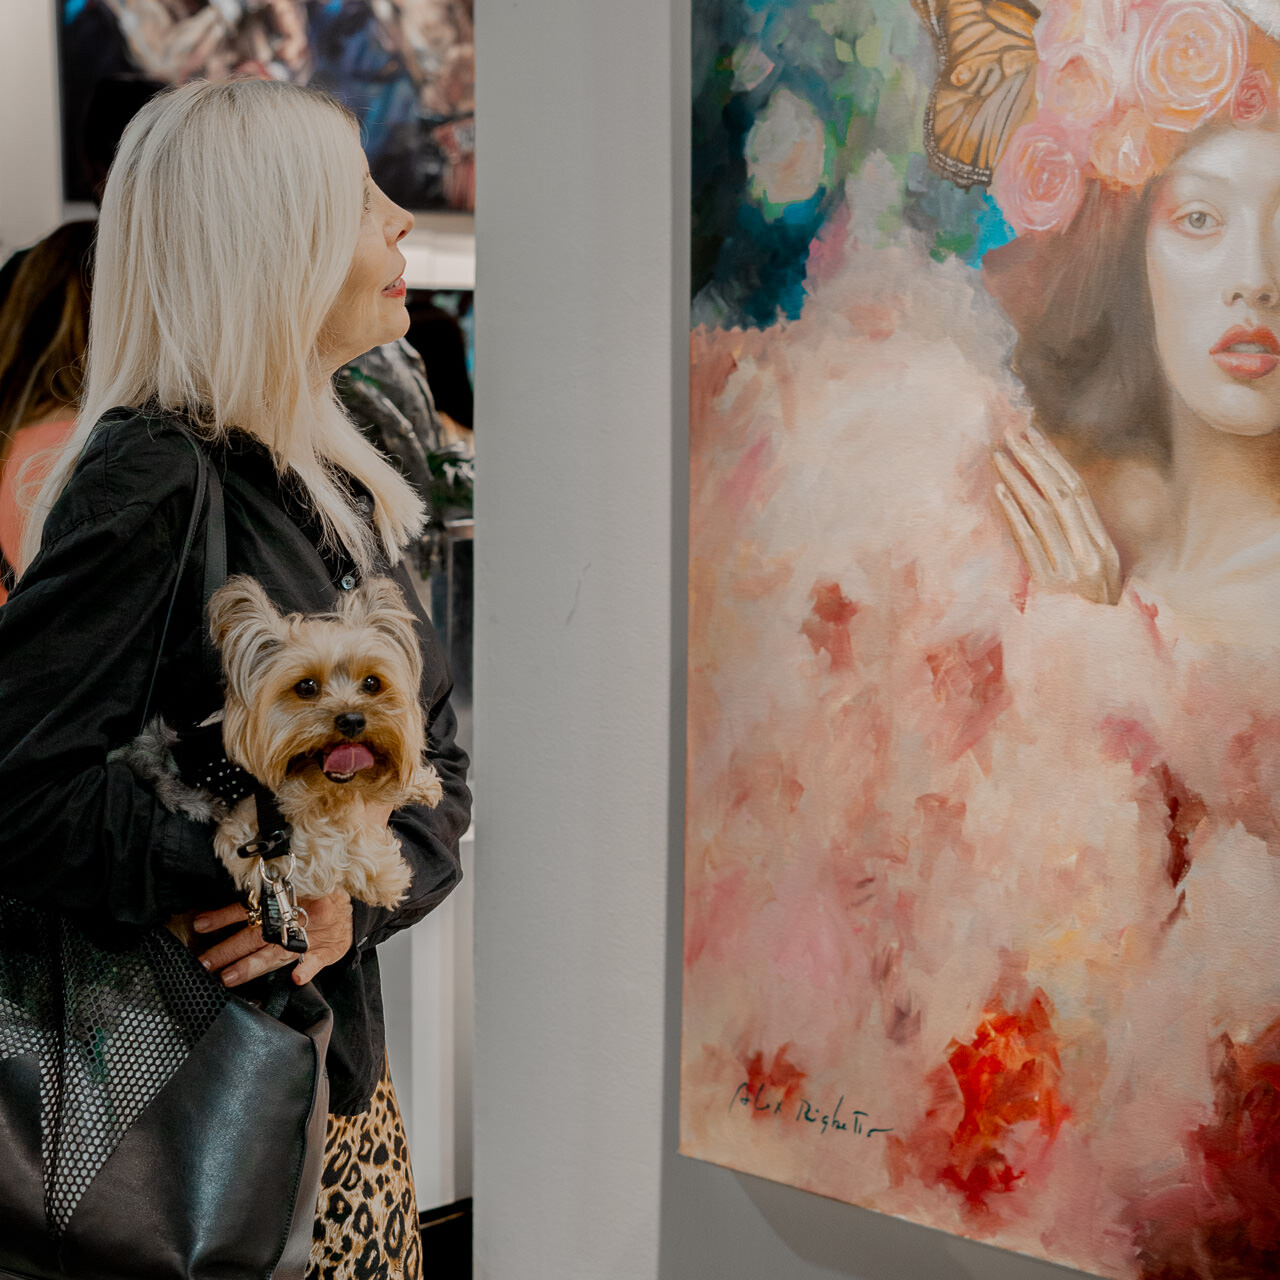 A woman with a small dog in her arms admires Alex Righetto's painting 'The Guardian' at an art exhibition, her attention absorbed by the artwork.